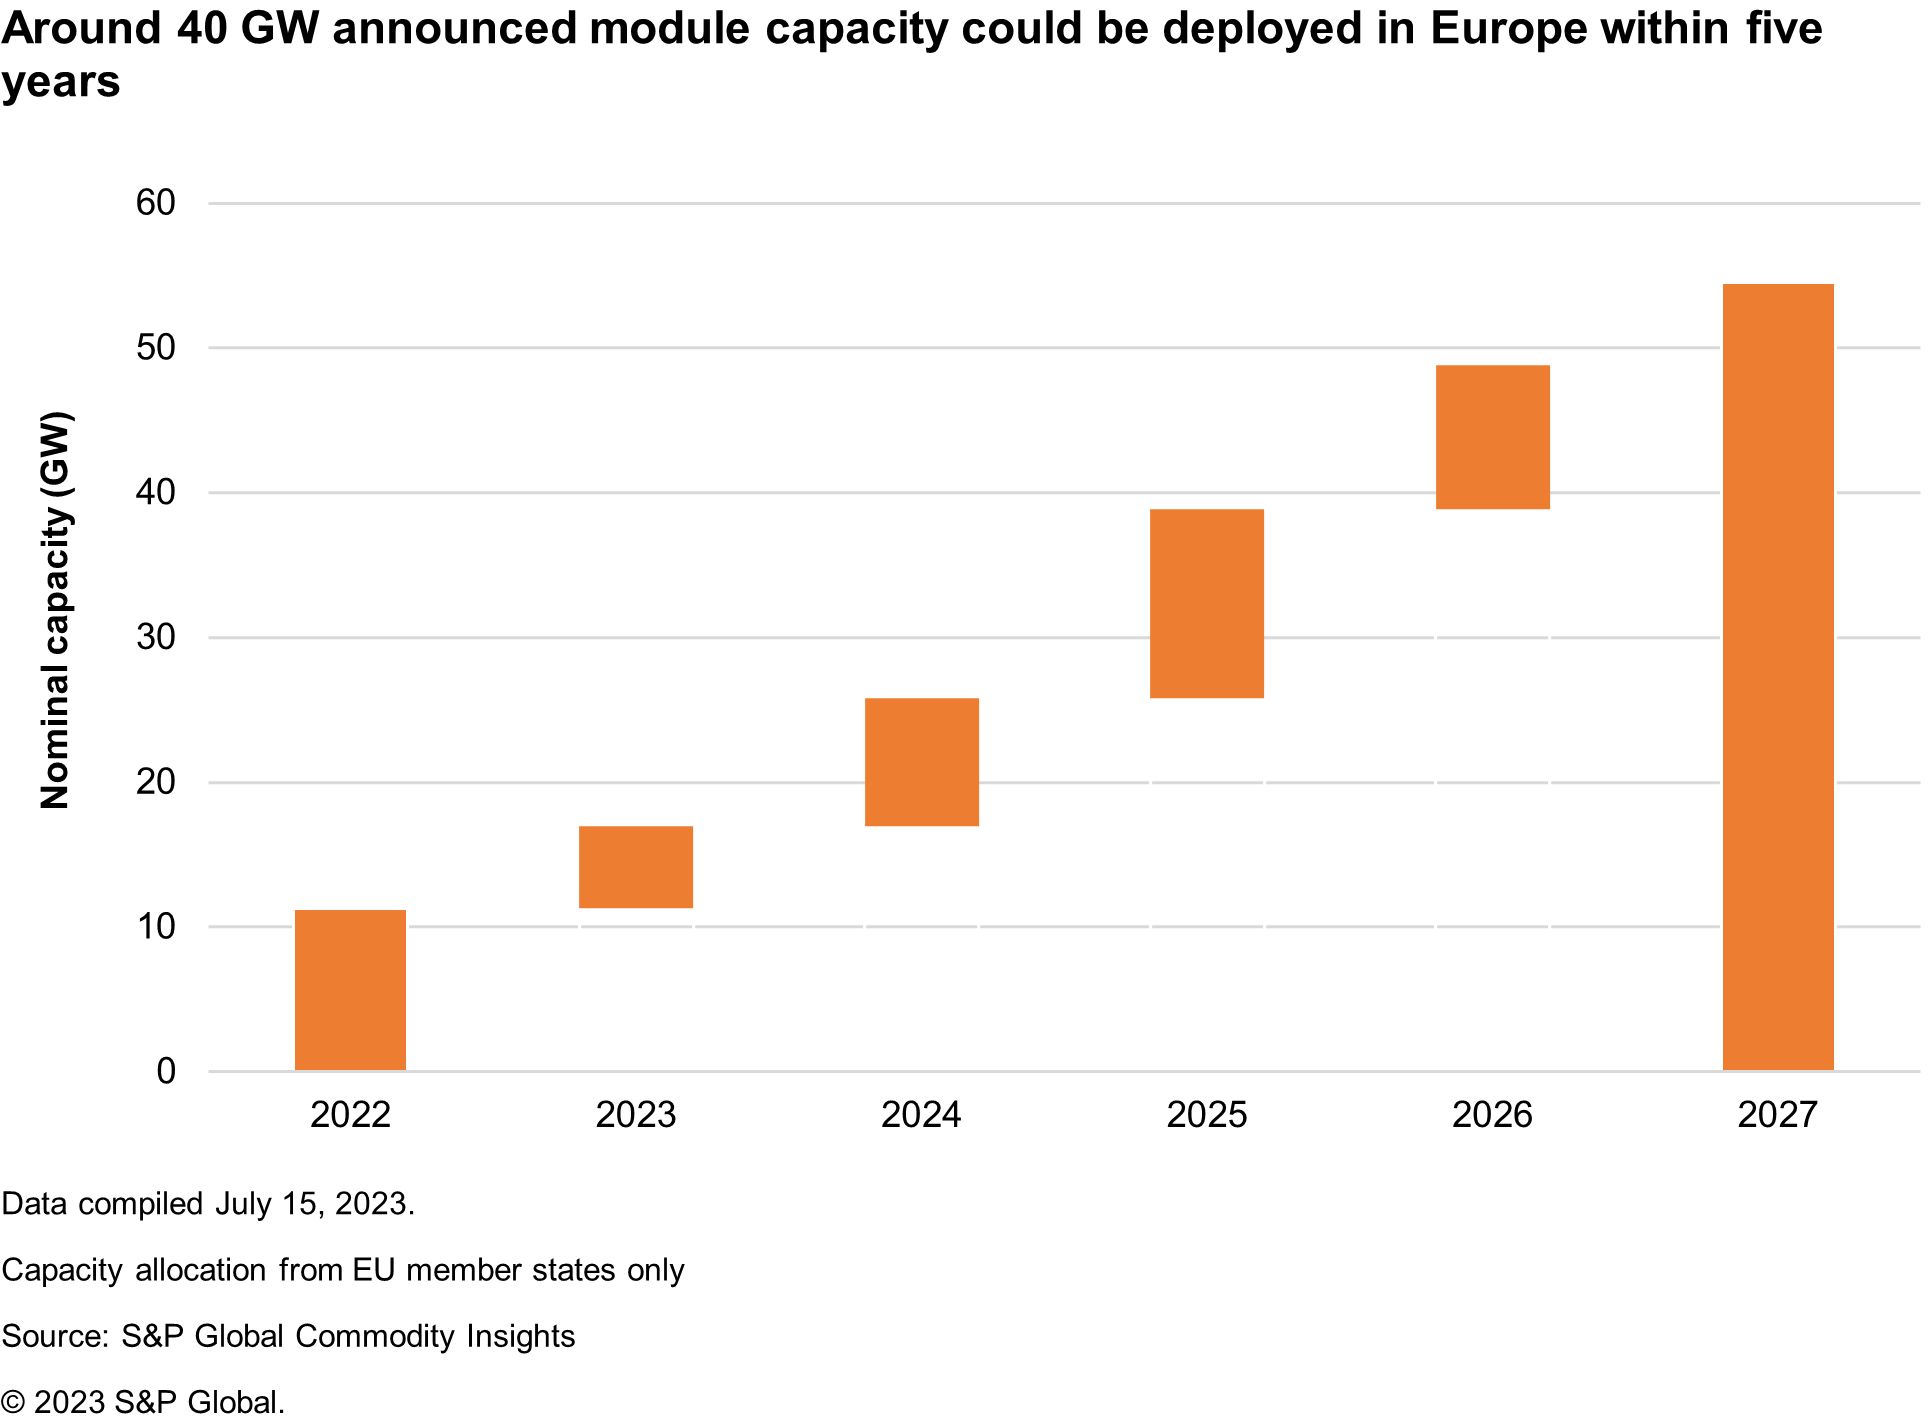 Around 40 GW announced module capacity could be deployed in Europe within five years